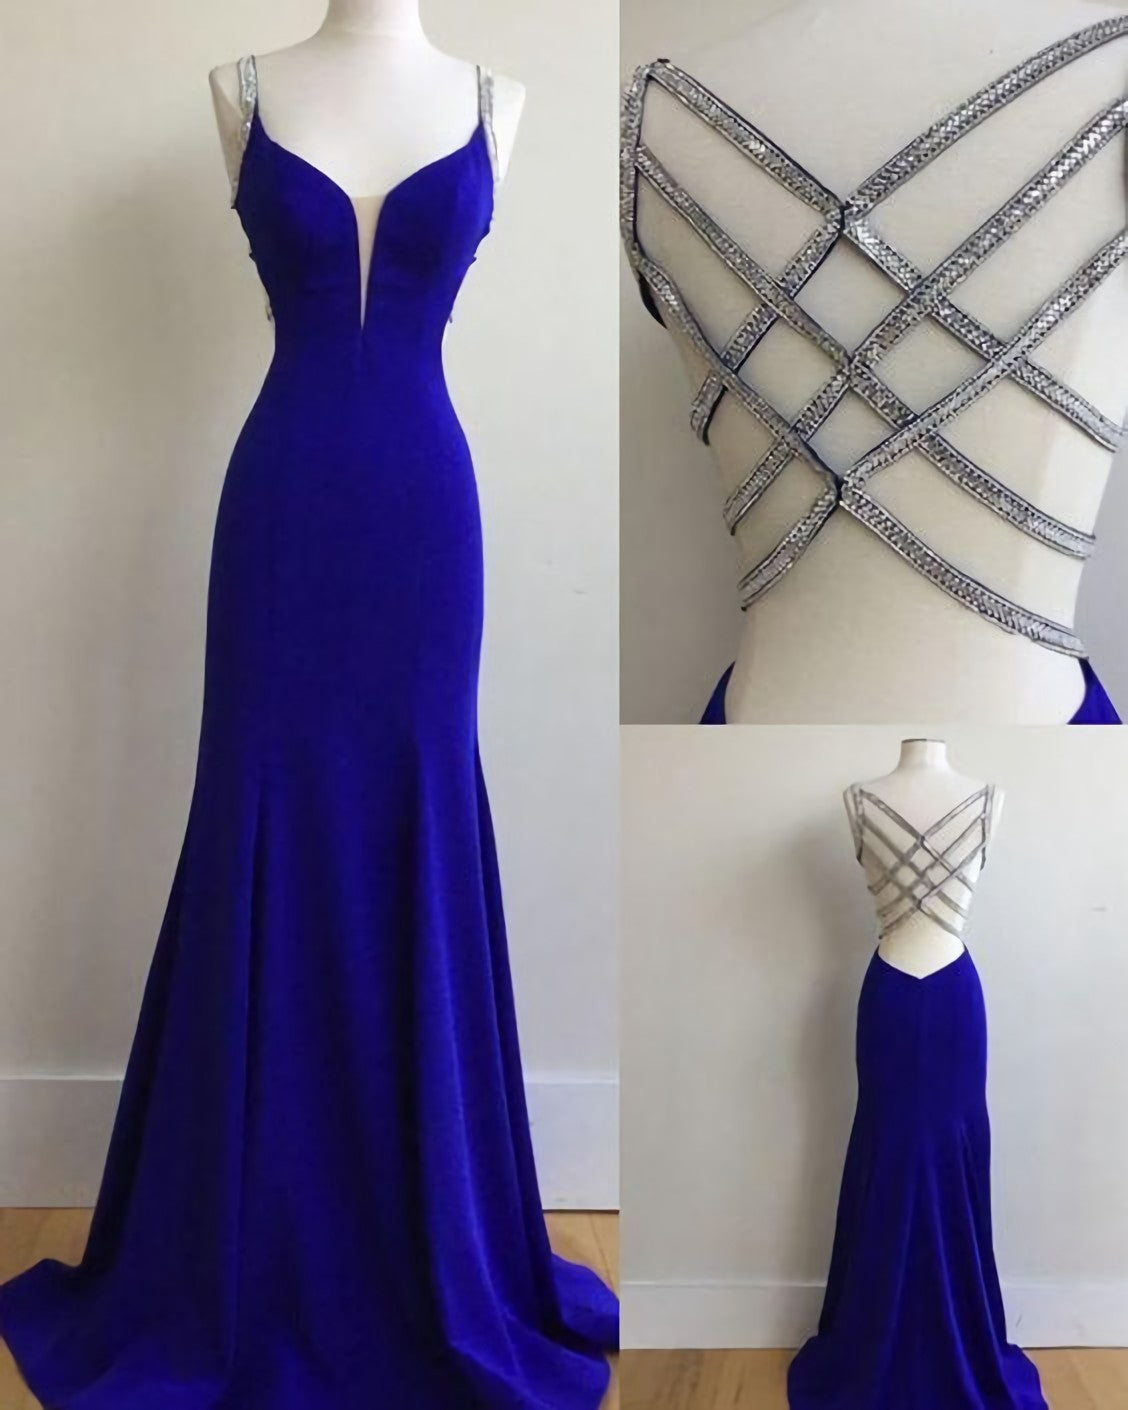 Prom Dress With Long Sleeves, Royal Blue Prom Dress, For Teens Prom Dresses, Graduation School Party Gown